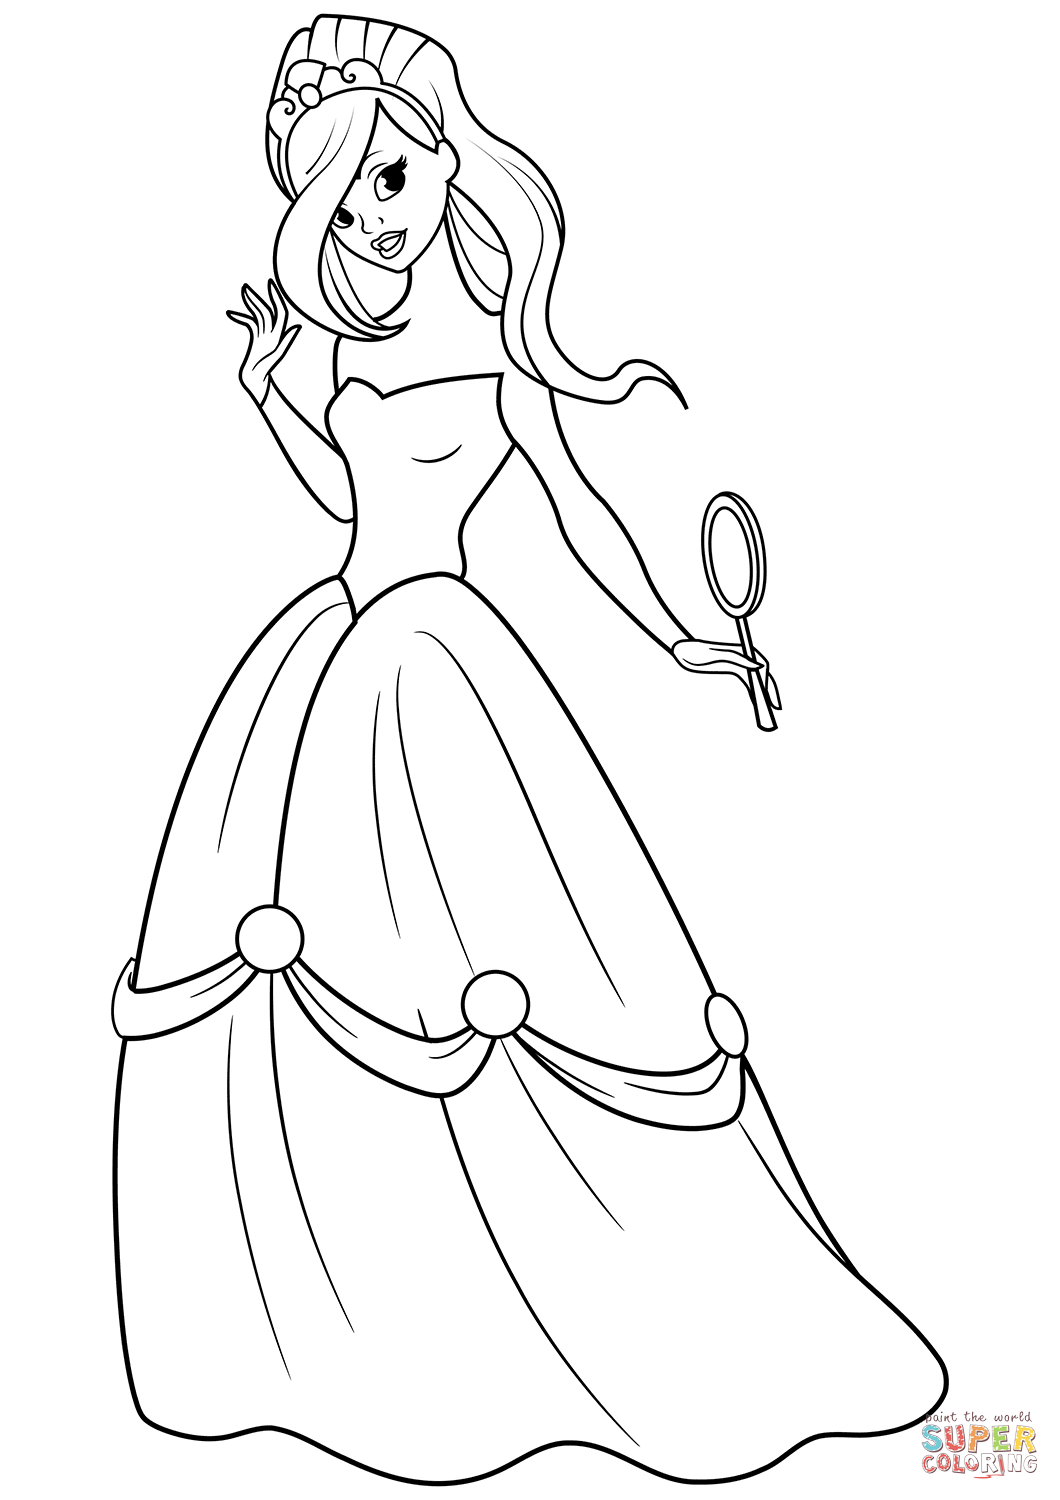 Beautiful princess with mirror in her hand coloring page free printable coloring pages